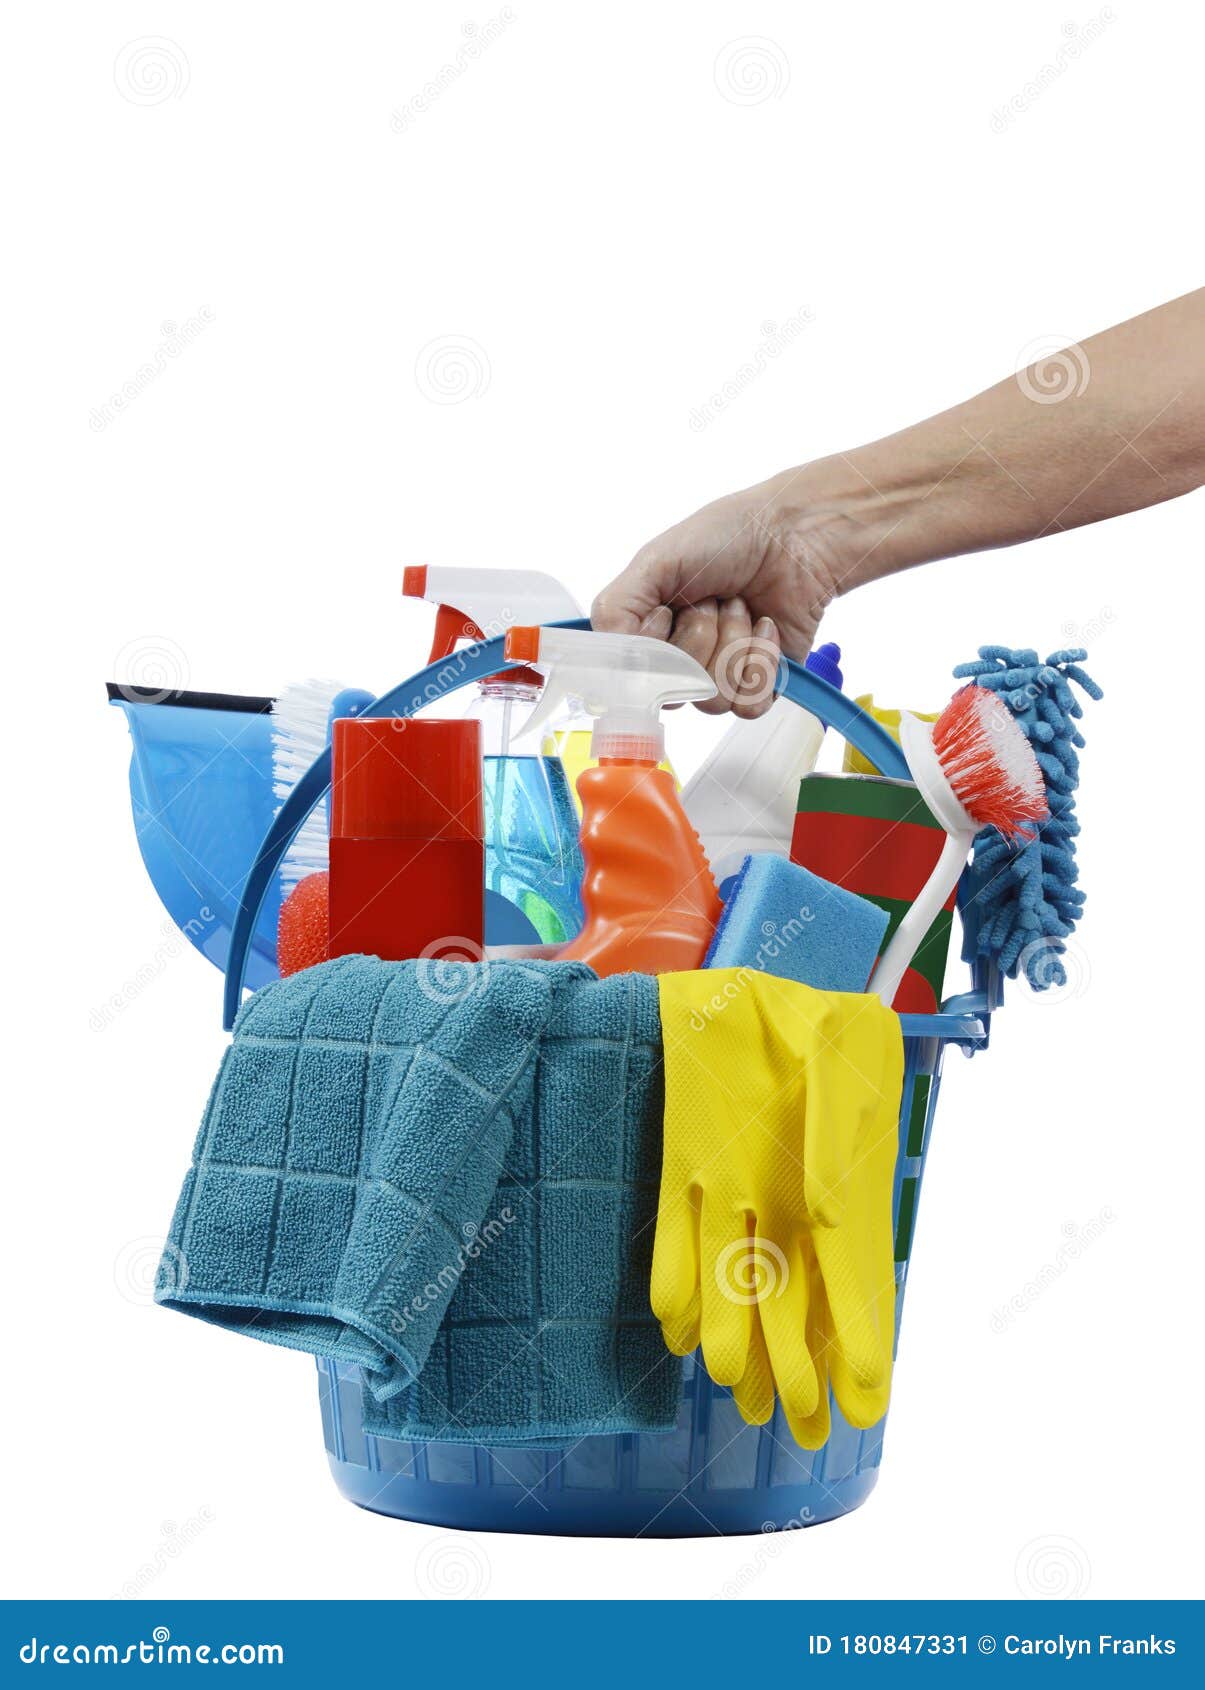 Basket with cleaning products on white background. Cleaning with